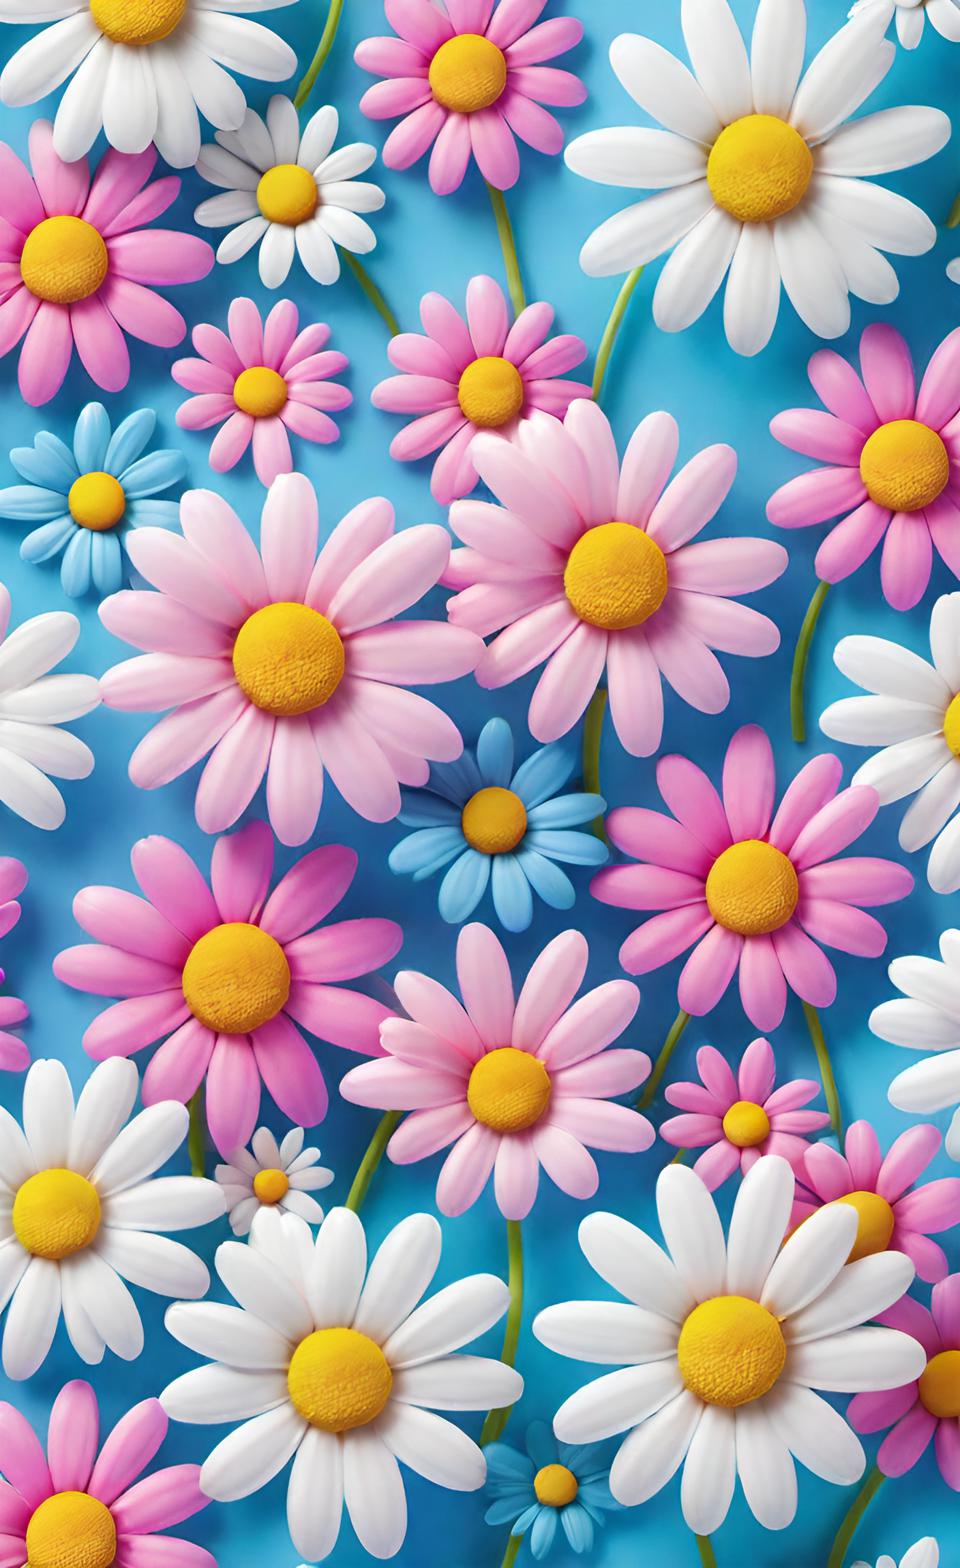 Small Daisies Pink Blue White Colorful Cute Background Wallpaper 4K For Free Download